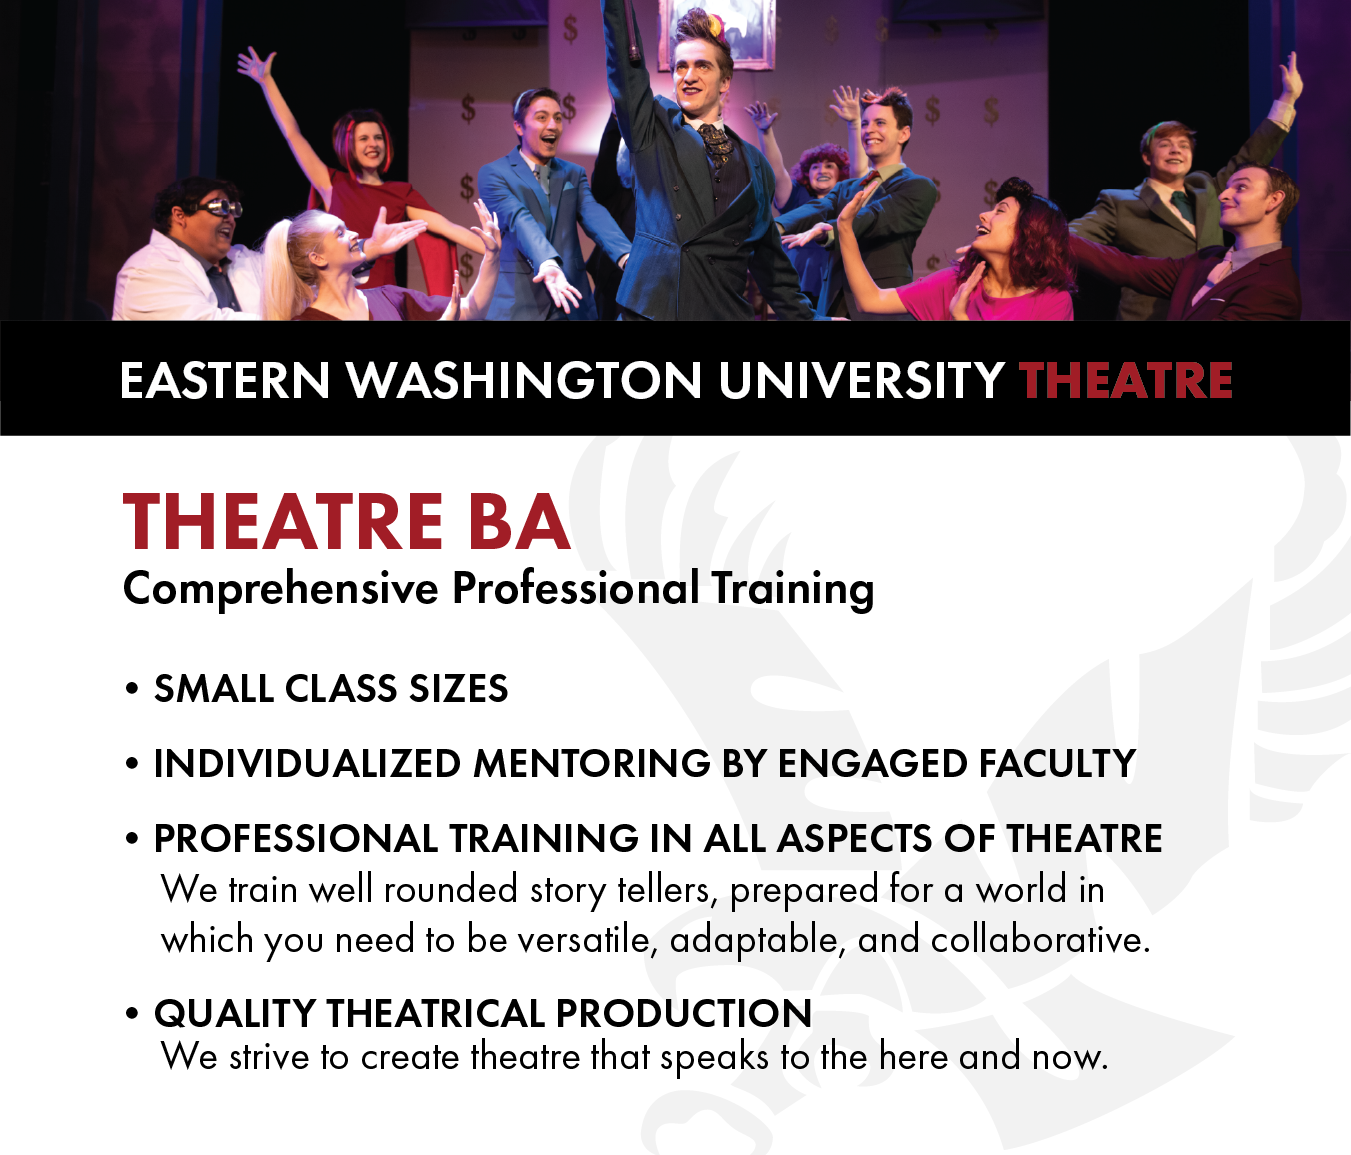 EWU Theatre BA - comprehensive professional training, small class sizes, individualized mentoring